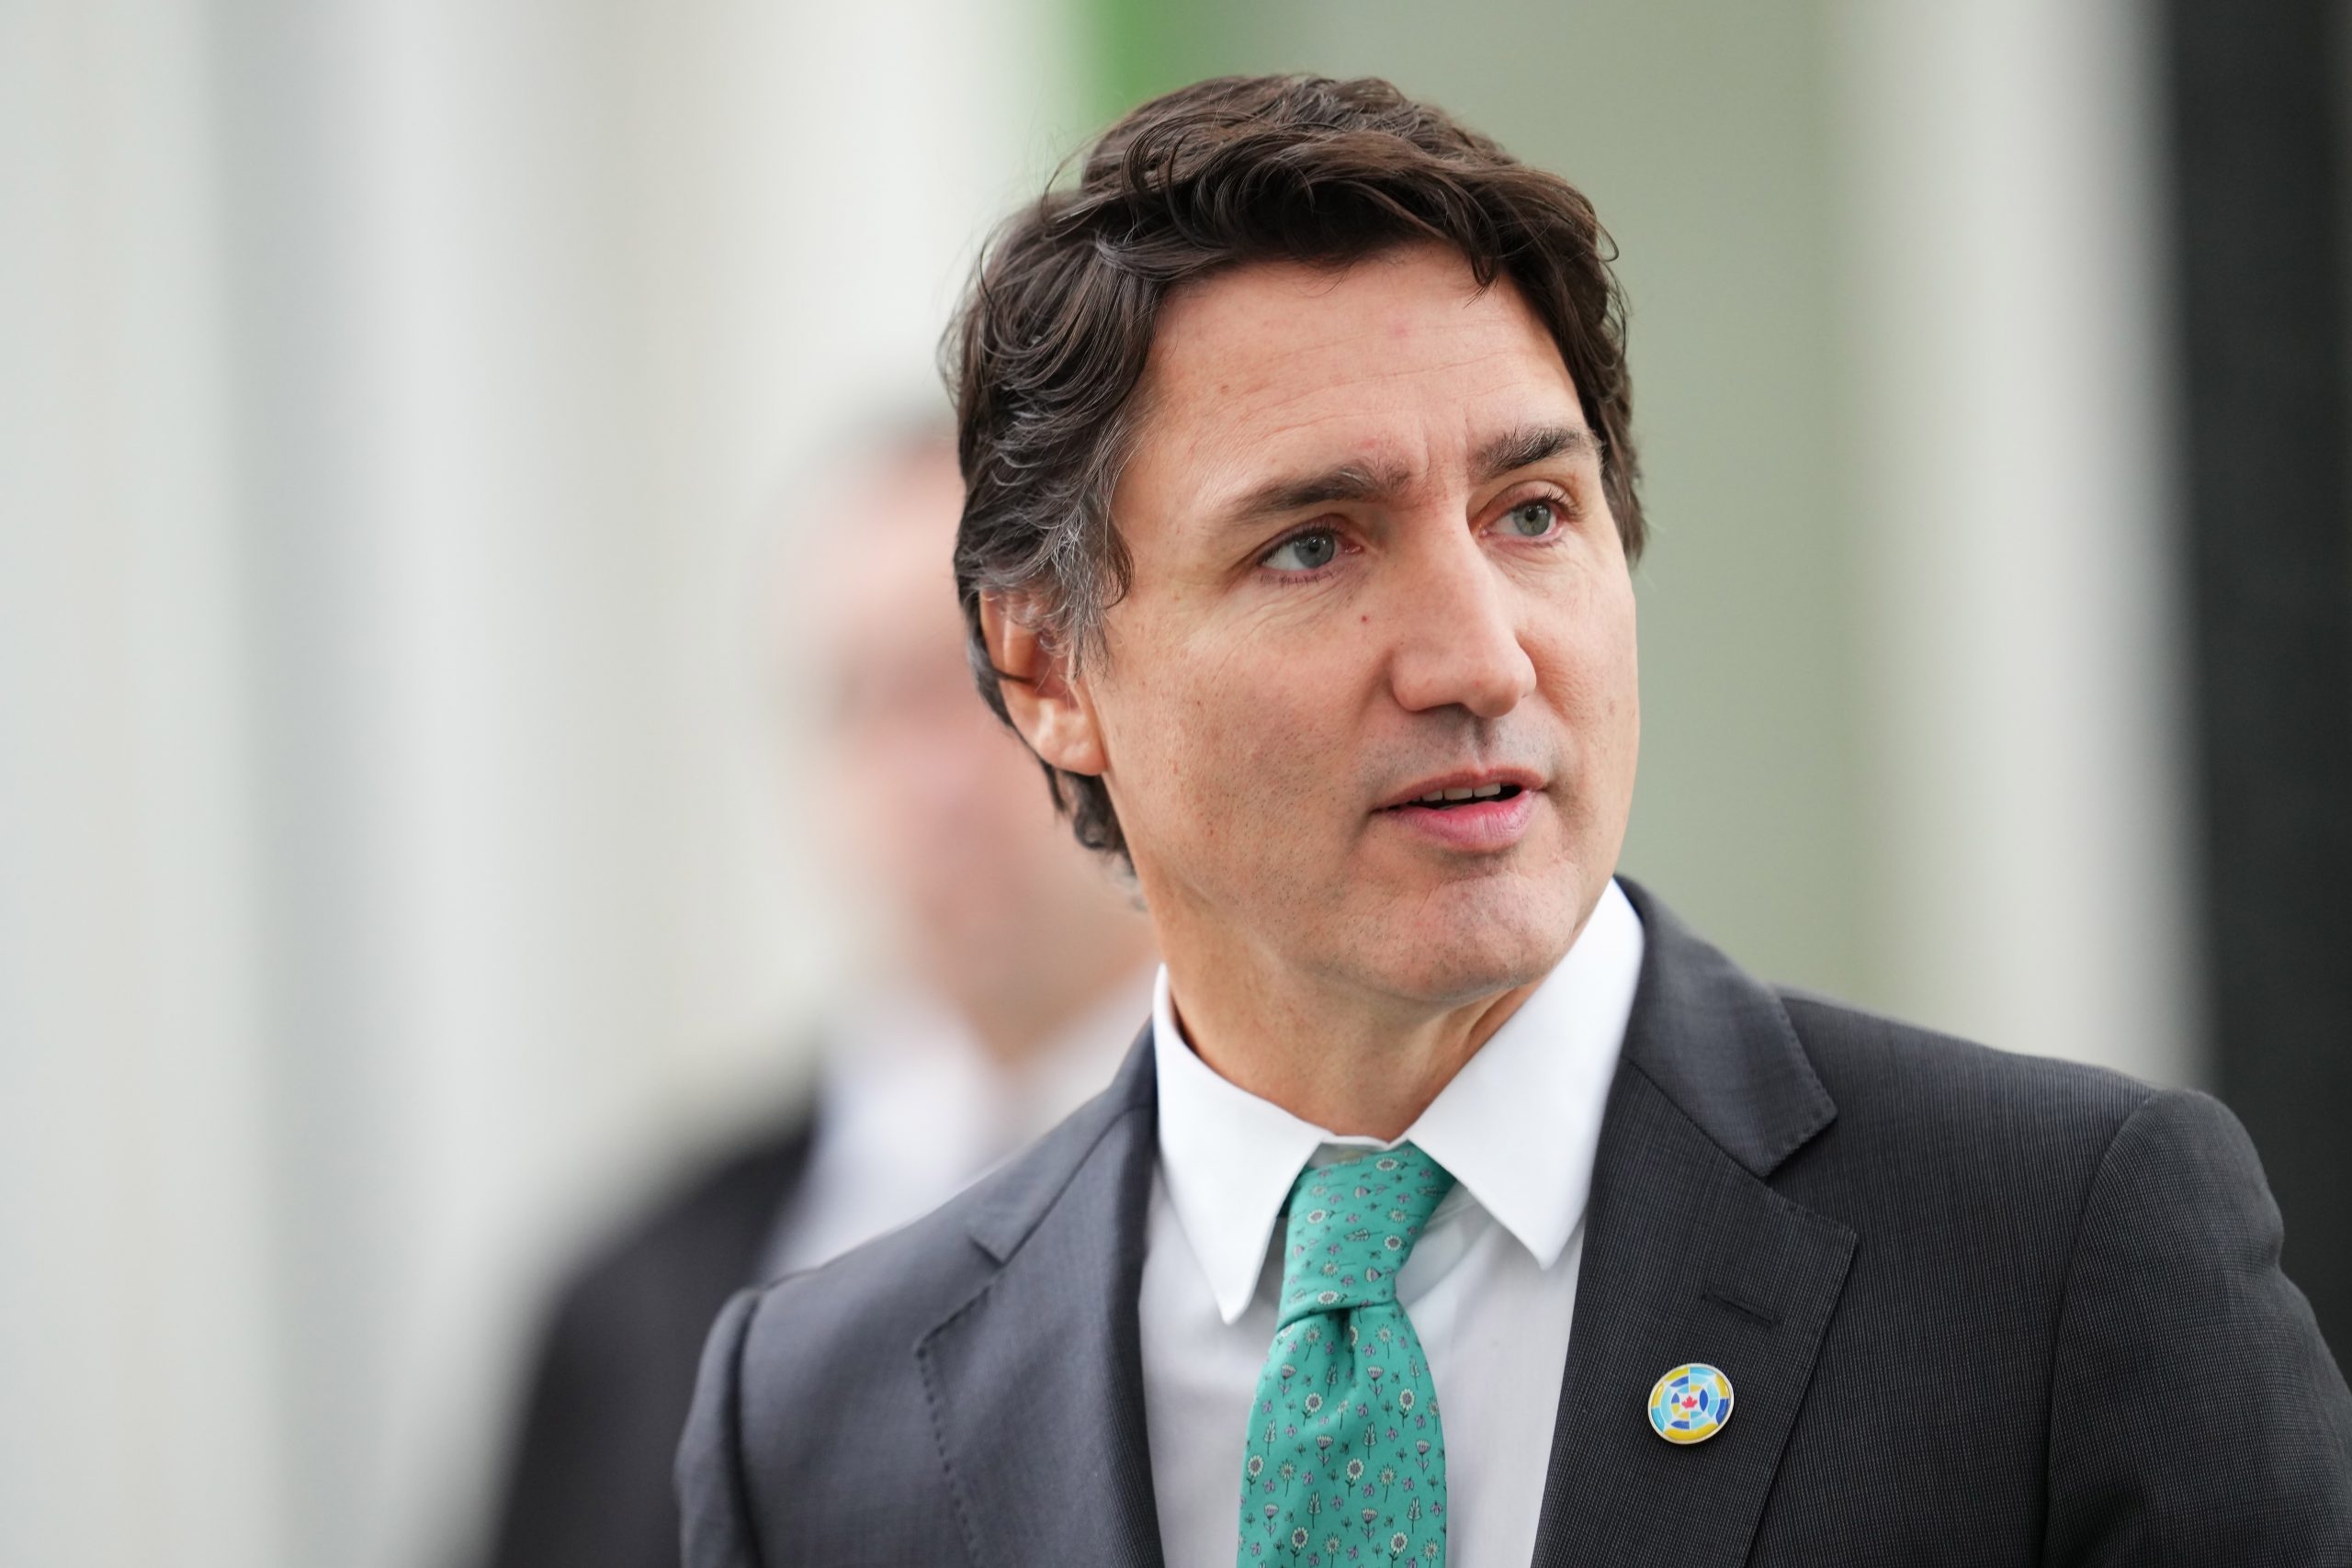 LILLEY: Trudeau flip flops on carbon tax for heating oil as his support cools